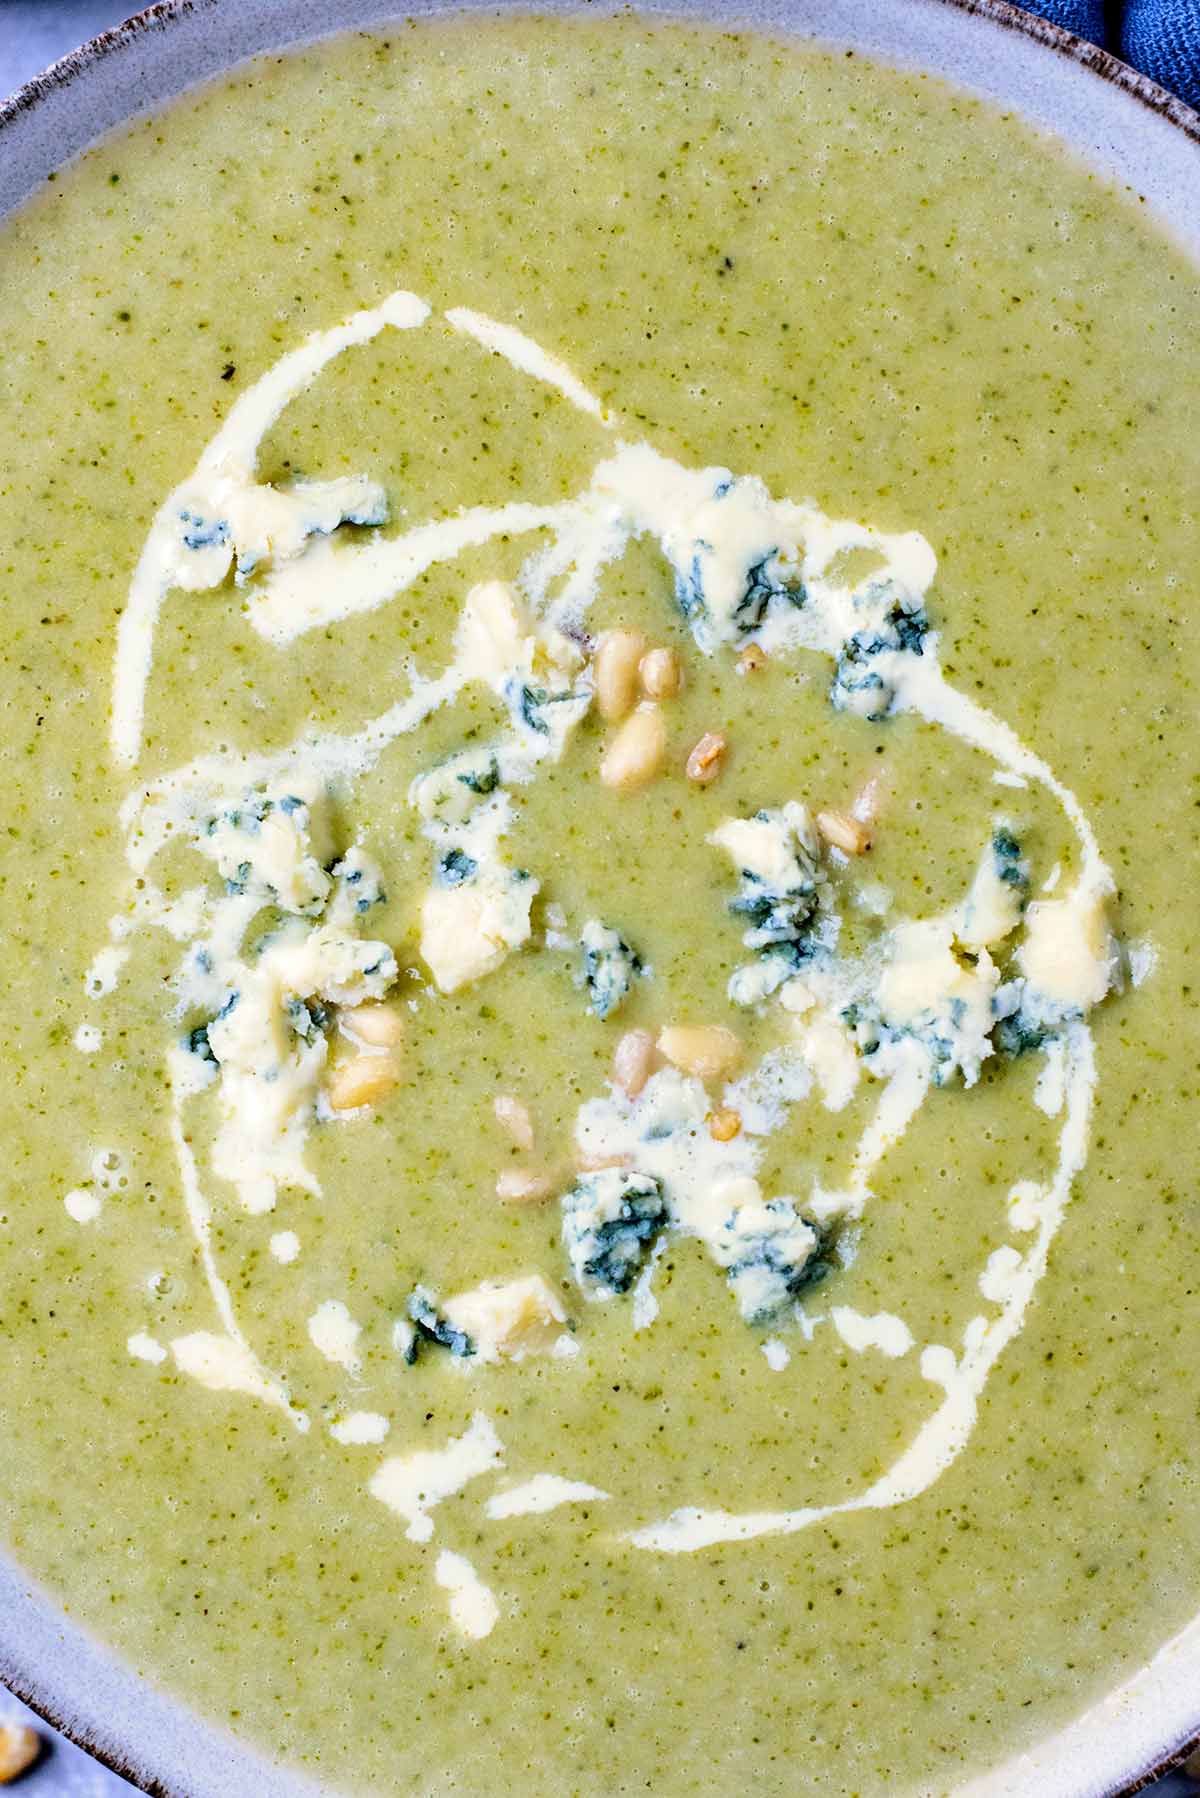 Cream drizzled on top of soup with crumbled stilton added.